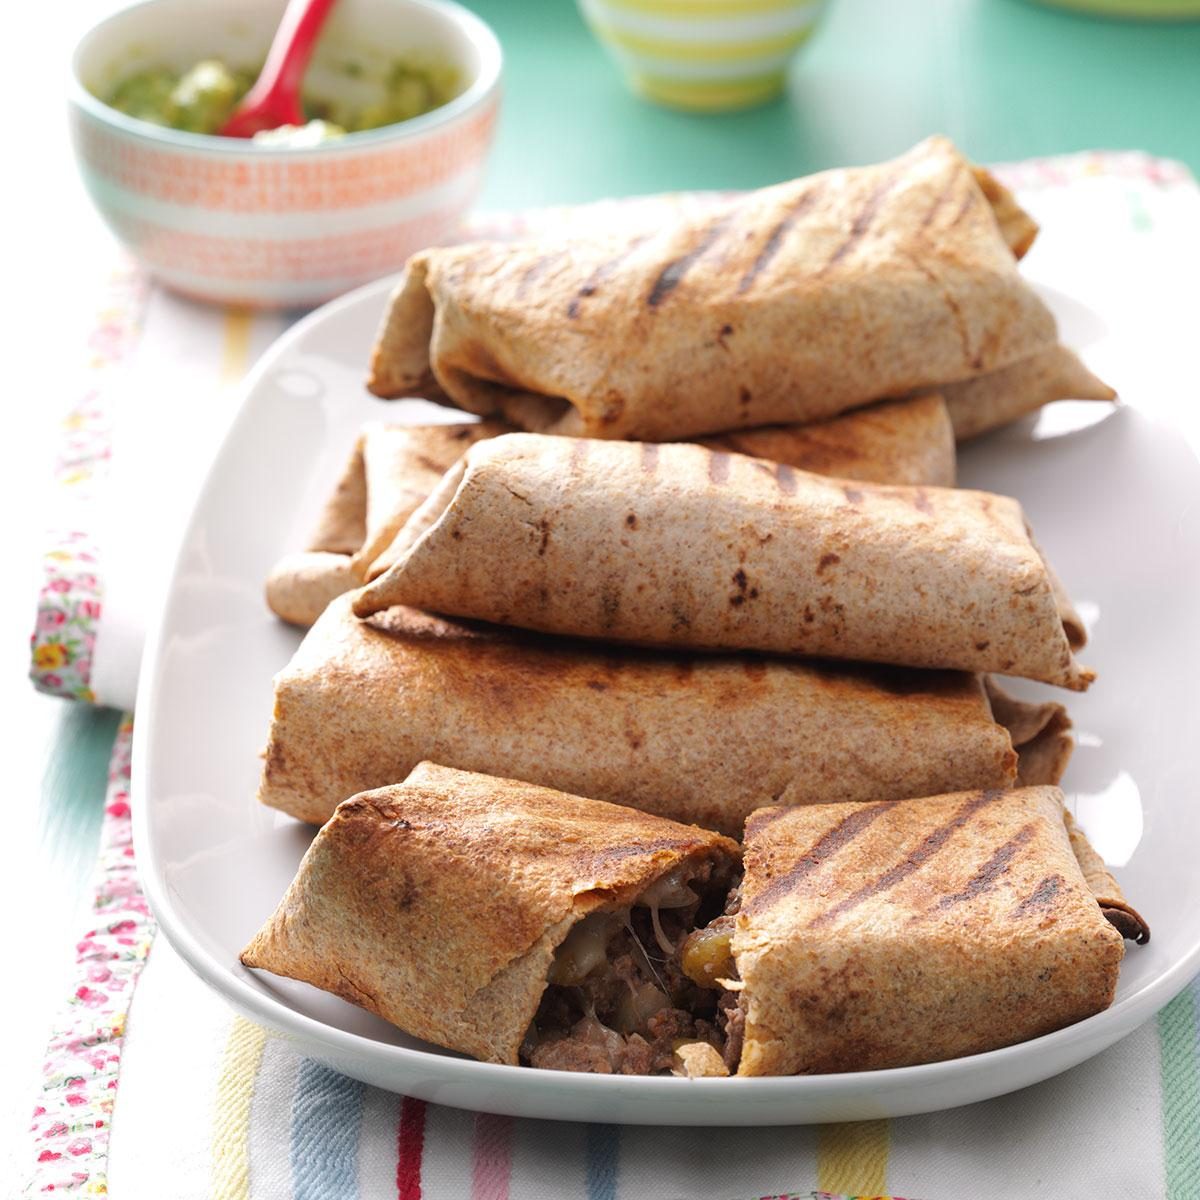 Beef Chimichangas - Num's the Word